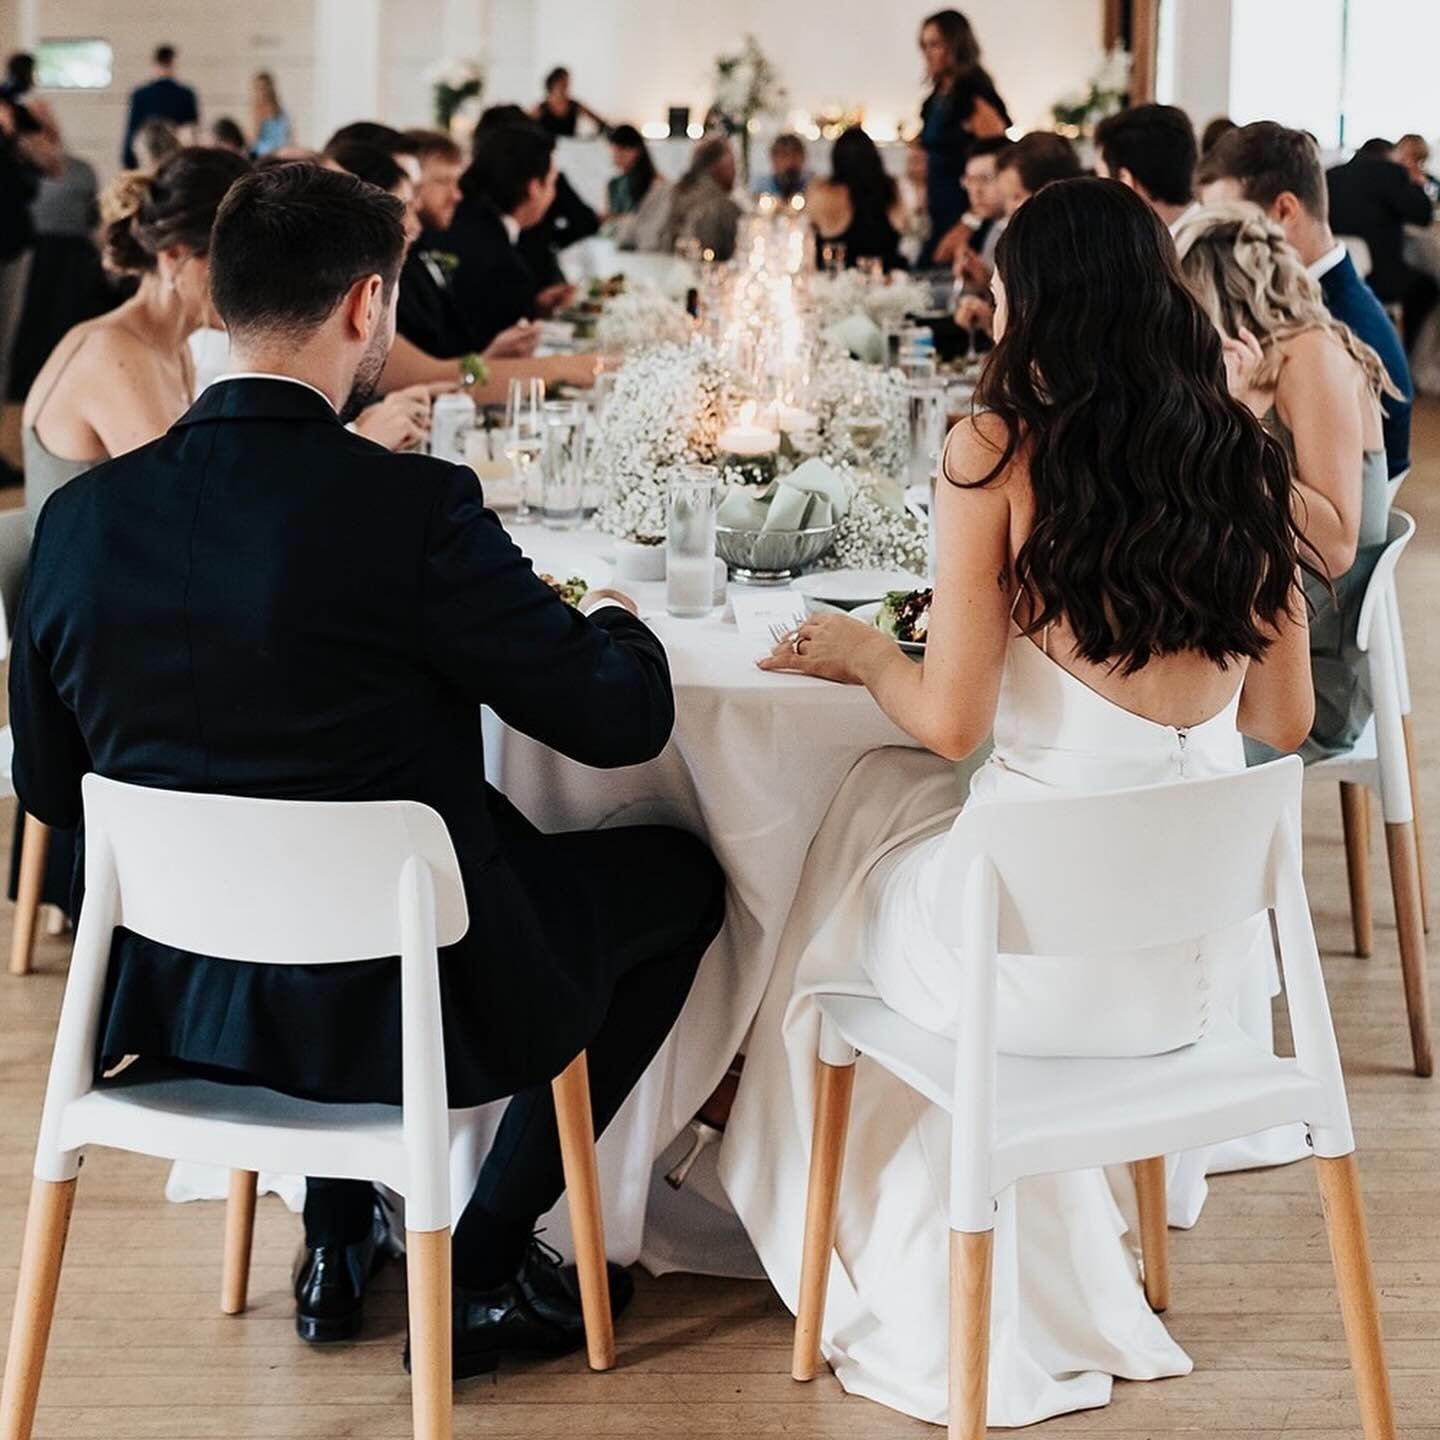 So many sweet, intimate moments made this day one for the books. The floor plan features one of our favorite trending table styles that caps off a long dinner table with a sweetheart table that looks out to all of your guests. It&rsquo;s absolute per